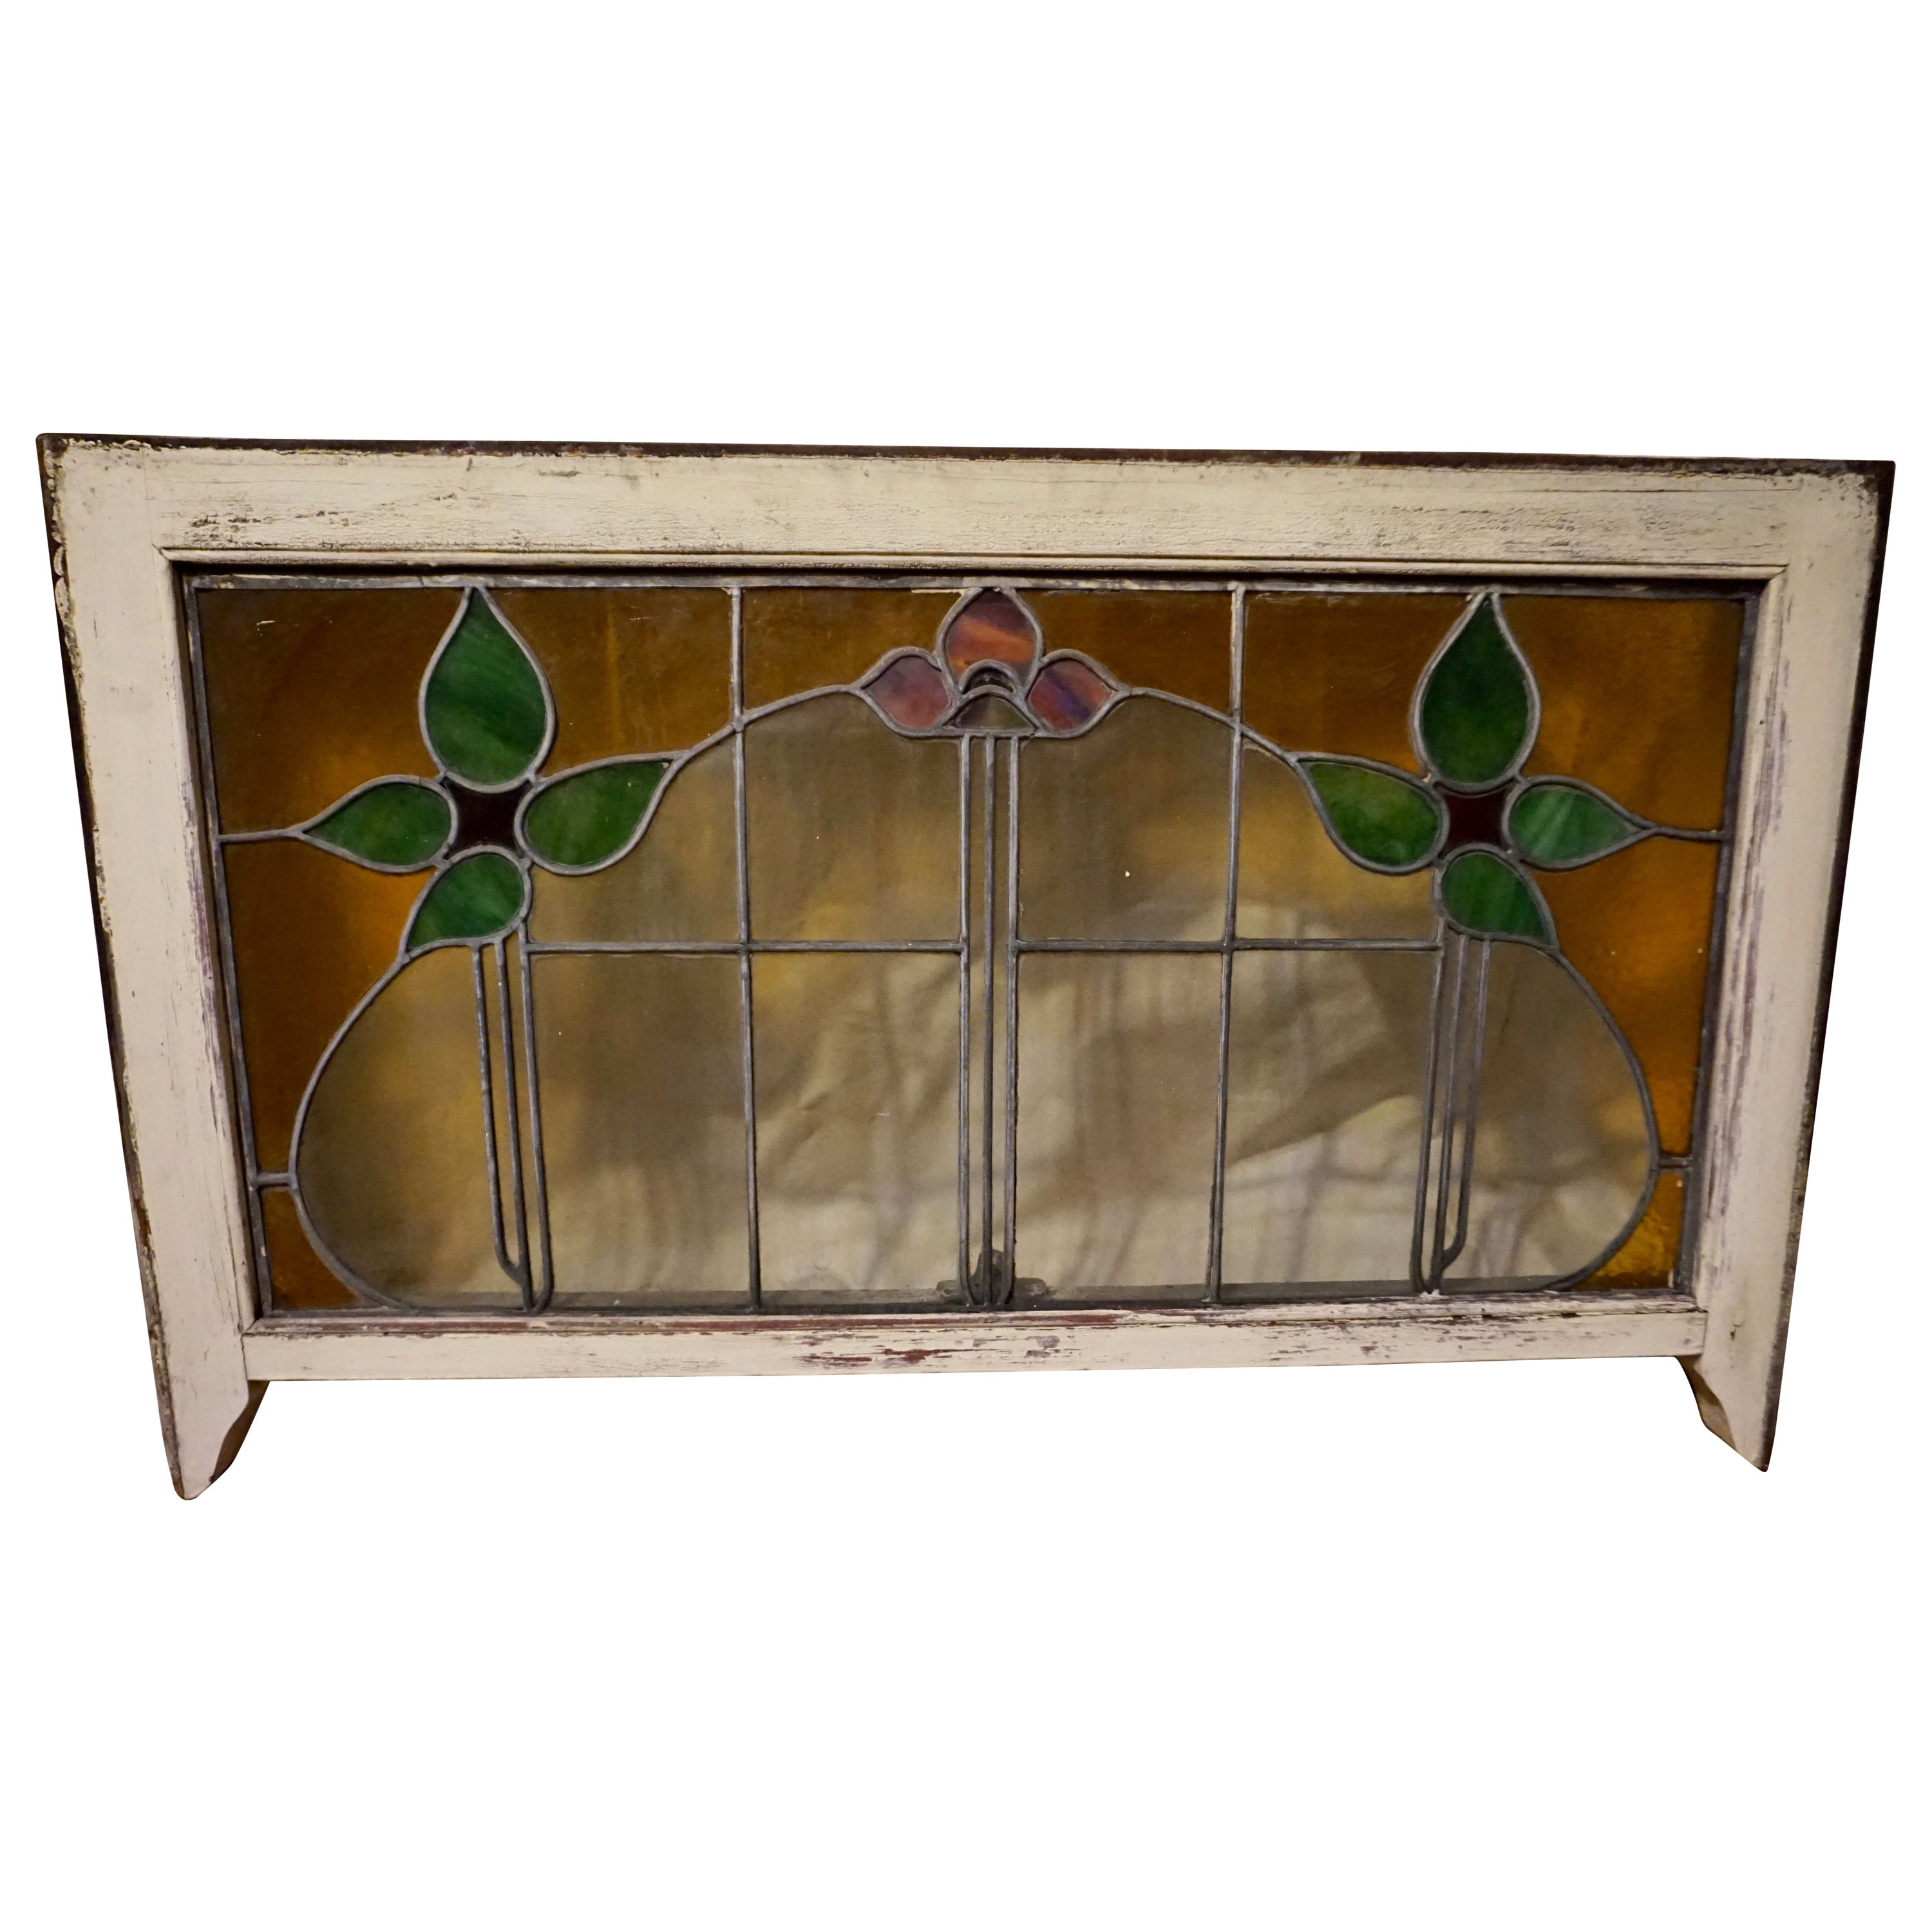 Large Arts & Crafts Stained Glass Window with Floral Theme